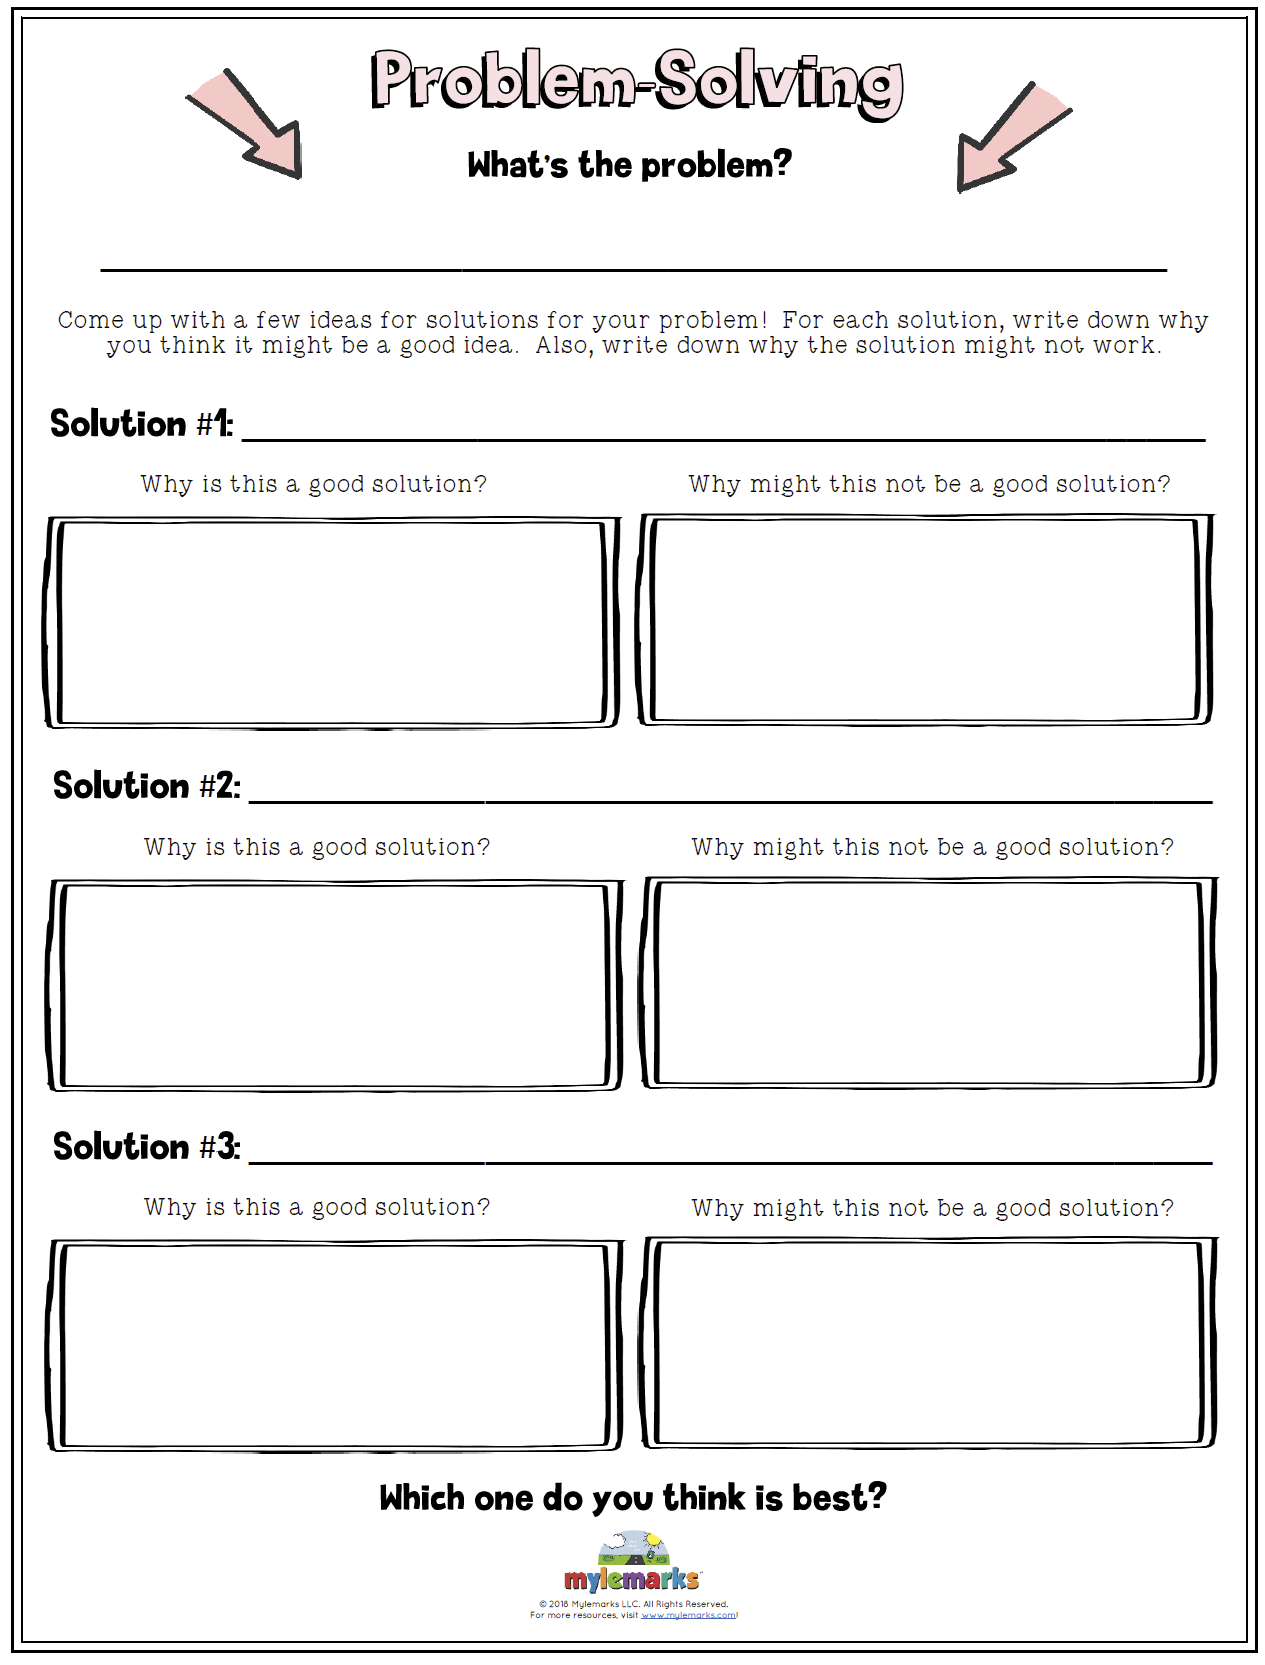 practice and problem solving exercises page 298